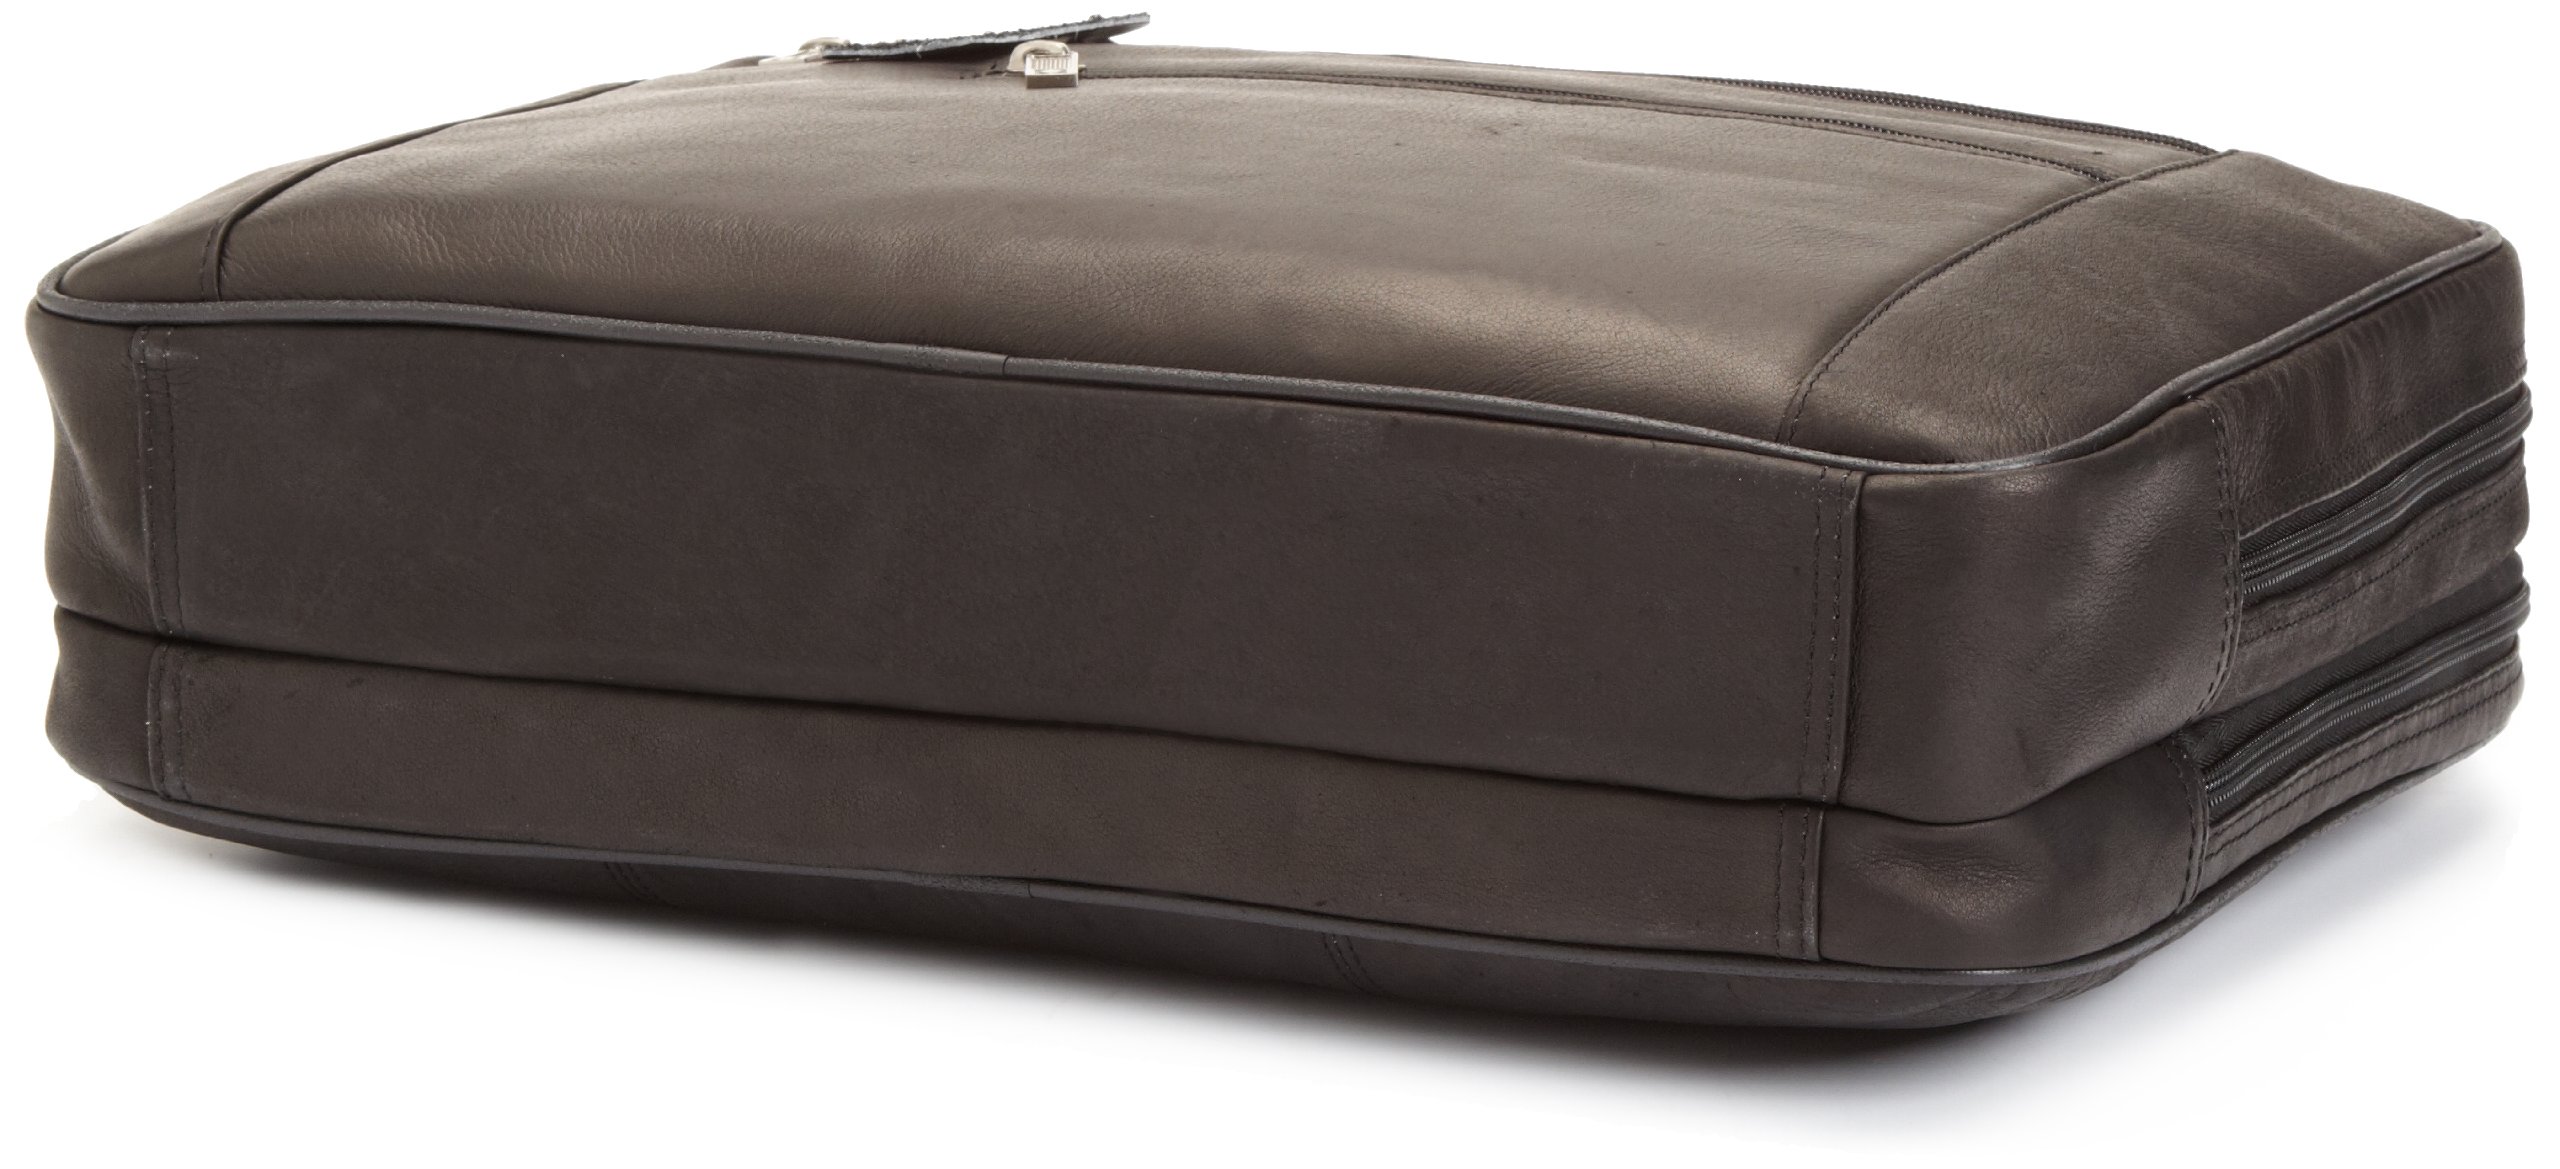 Kenneth Cole Reaction Luggage Double Play Brief